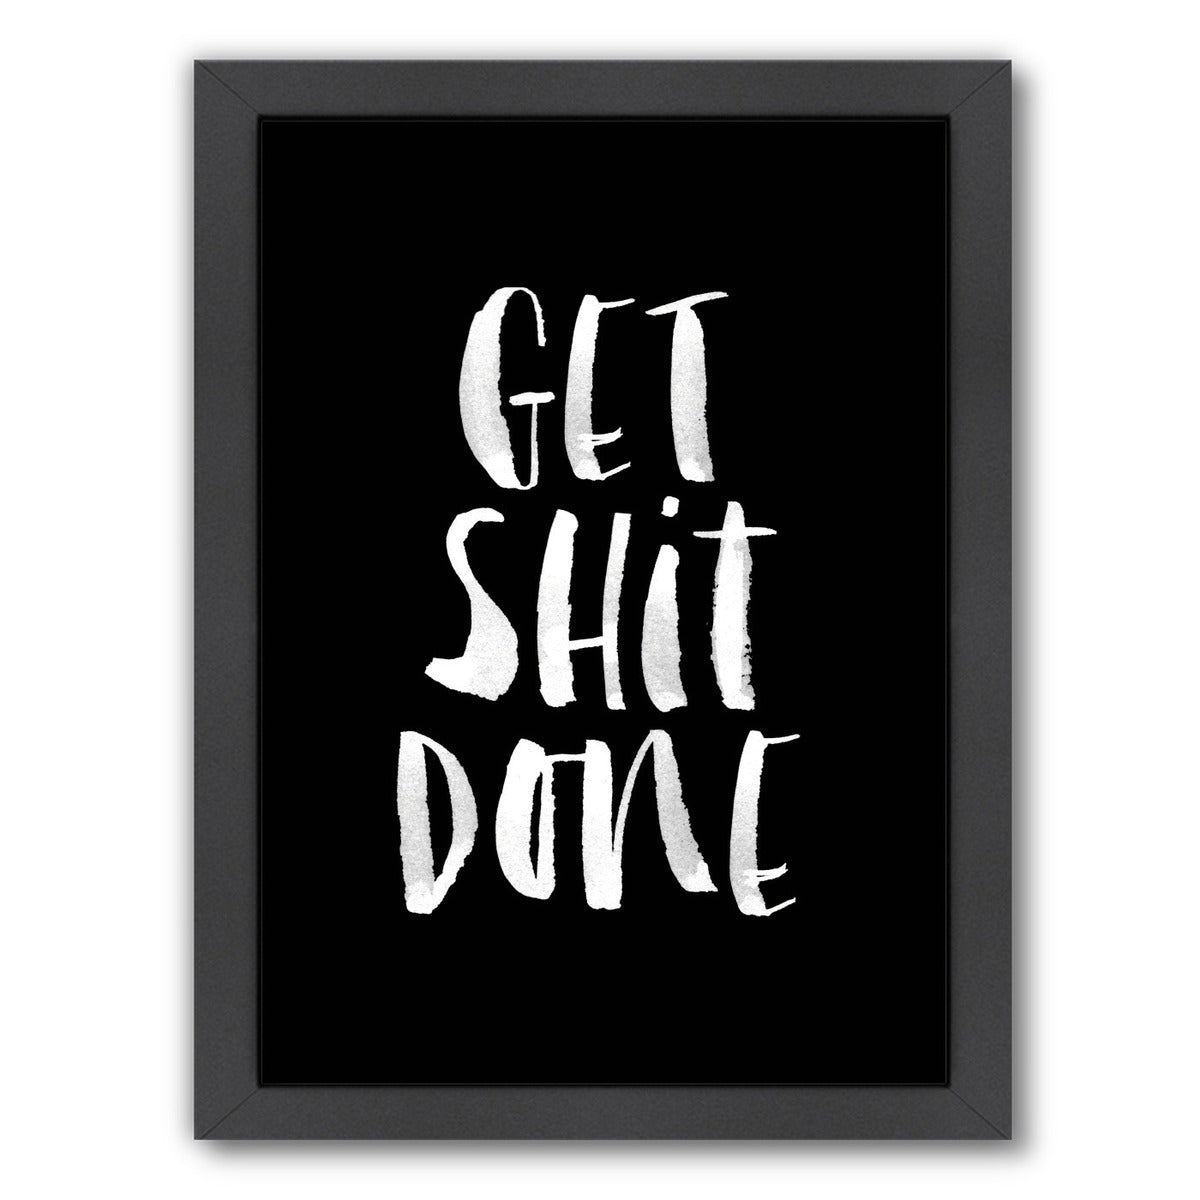 Get Shit Done by Motivated Type Framed Print - Americanflat